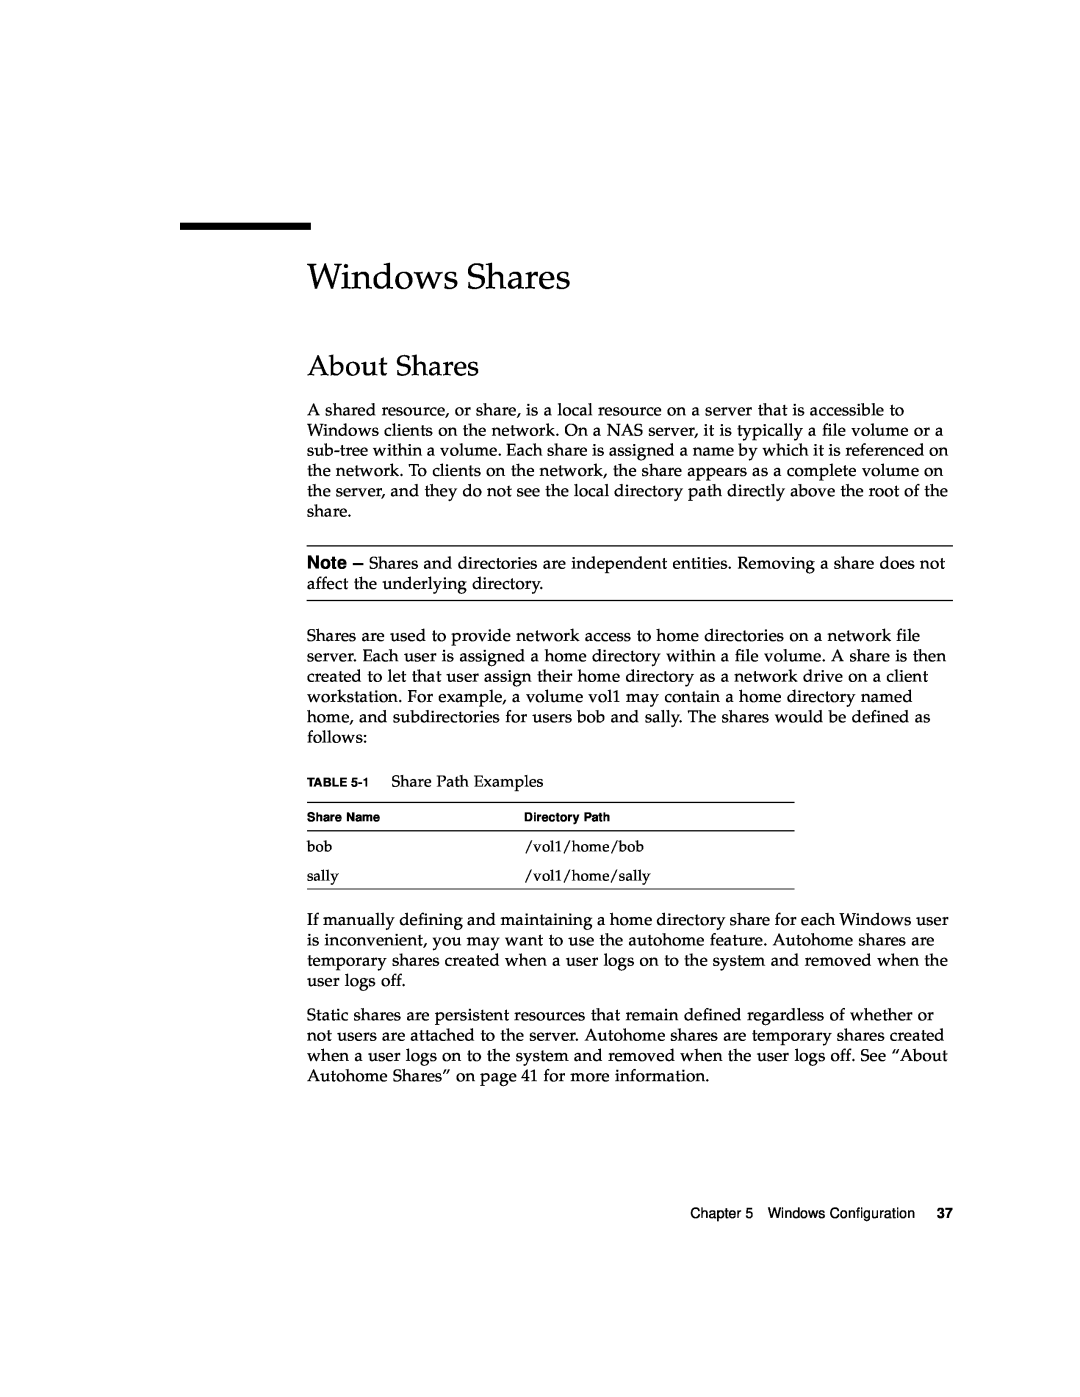 Sun Microsystems 5210 NAS manual Windows Shares, About Shares 